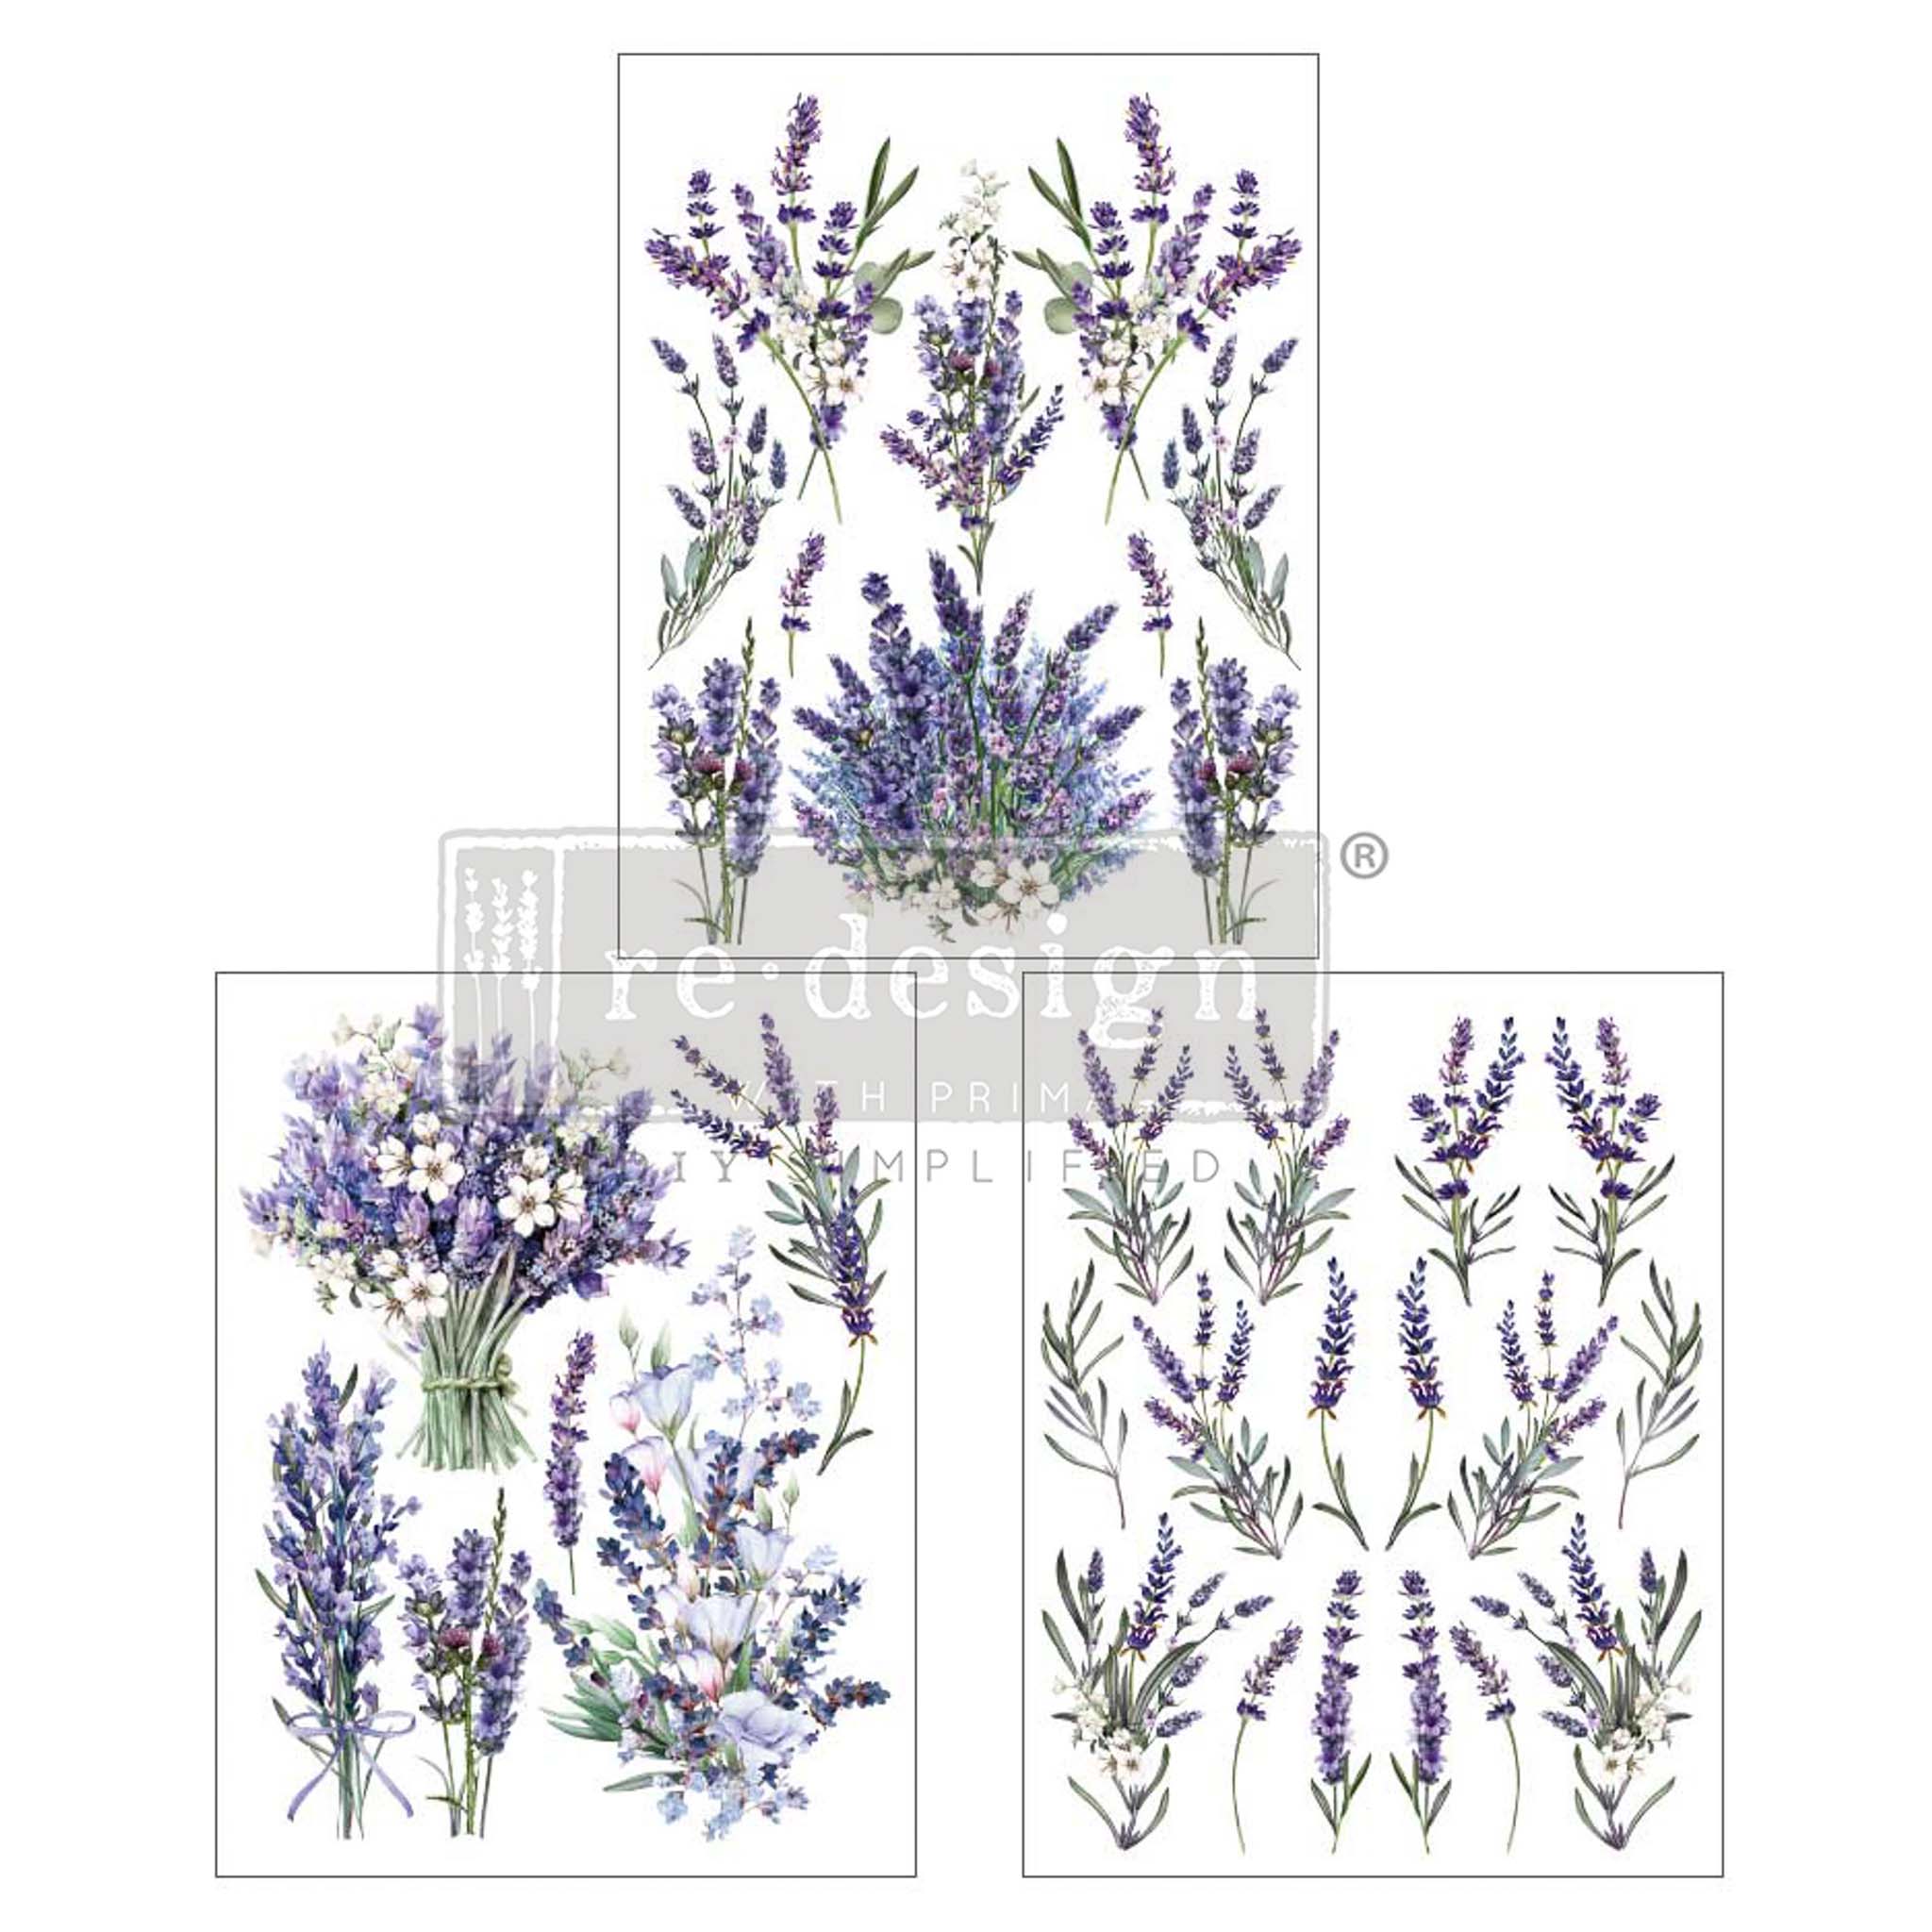 Three sheets of a small rub-on transfer design of bouquets and loose stems of fragrant lavender flowers.